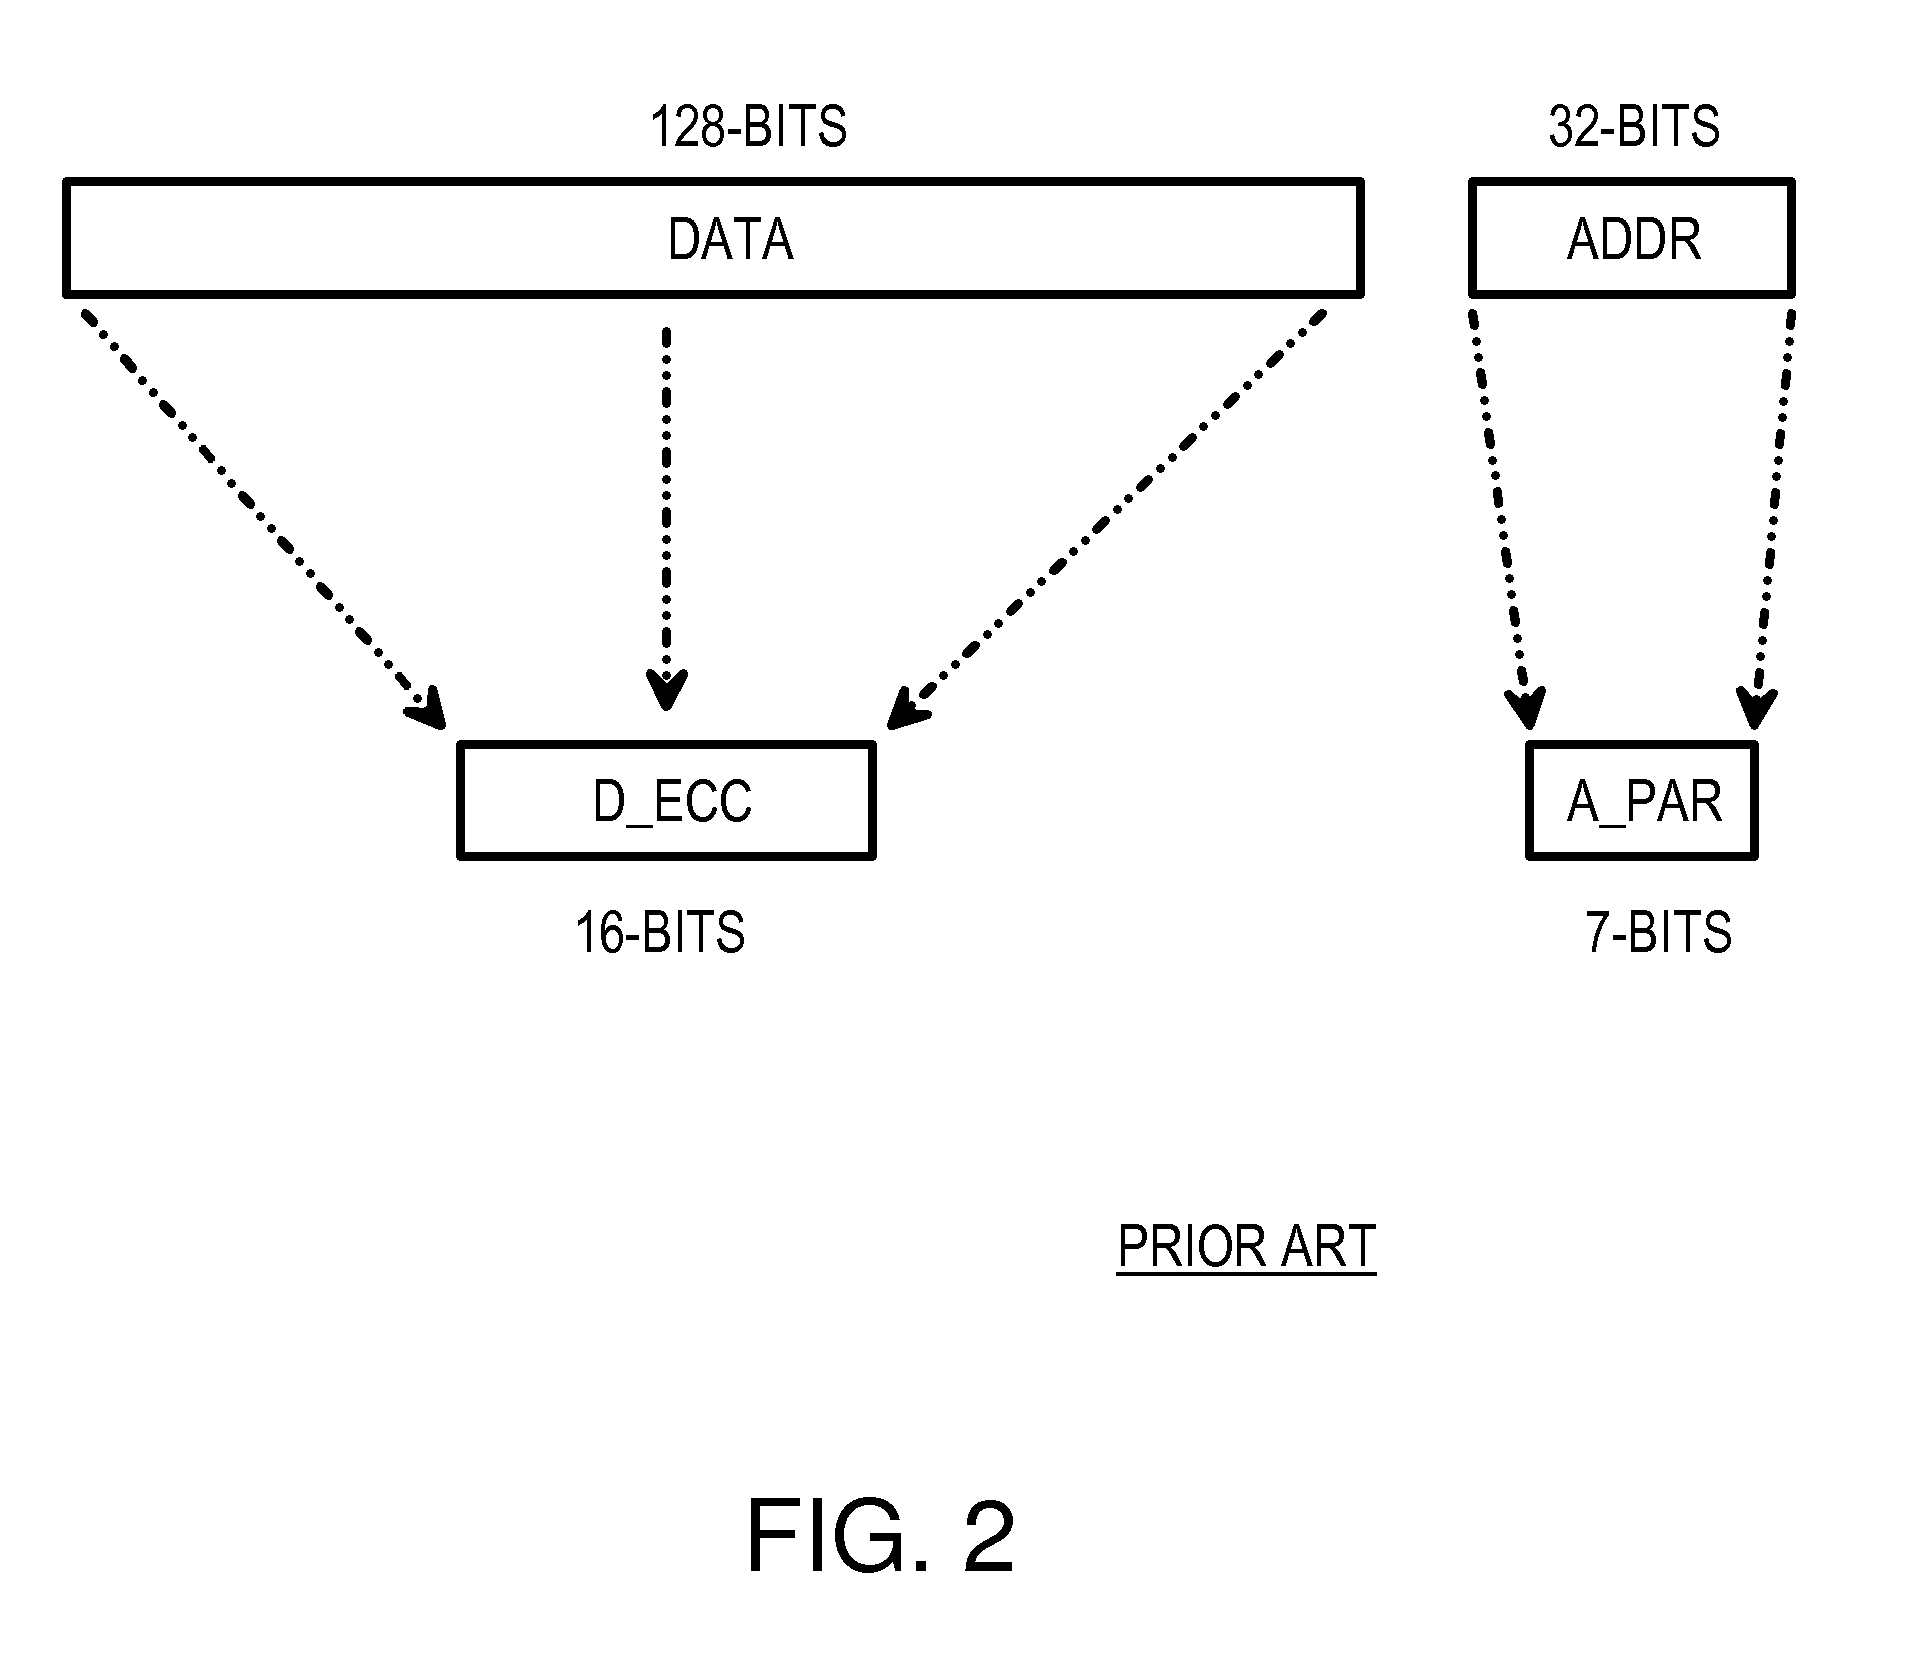 Subsystem and Method for Encoding 64-bit Data Nibble Error Correct and Cyclic-Redundancy Code (CRC) Address Error Detect for Use in a 76-bit Memory Module